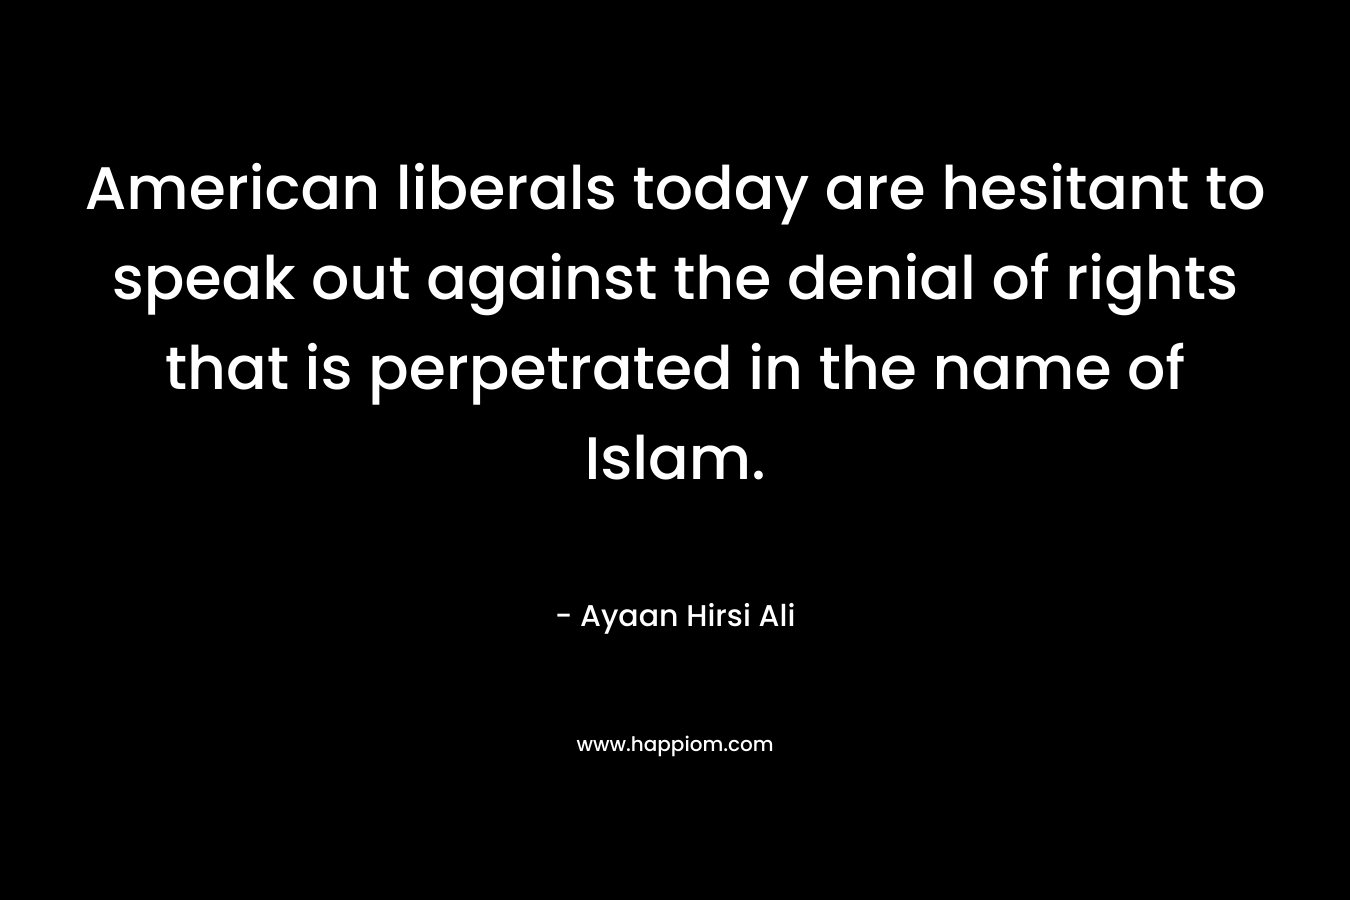 American liberals today are hesitant to speak out against the denial of rights that is perpetrated in the name of Islam.